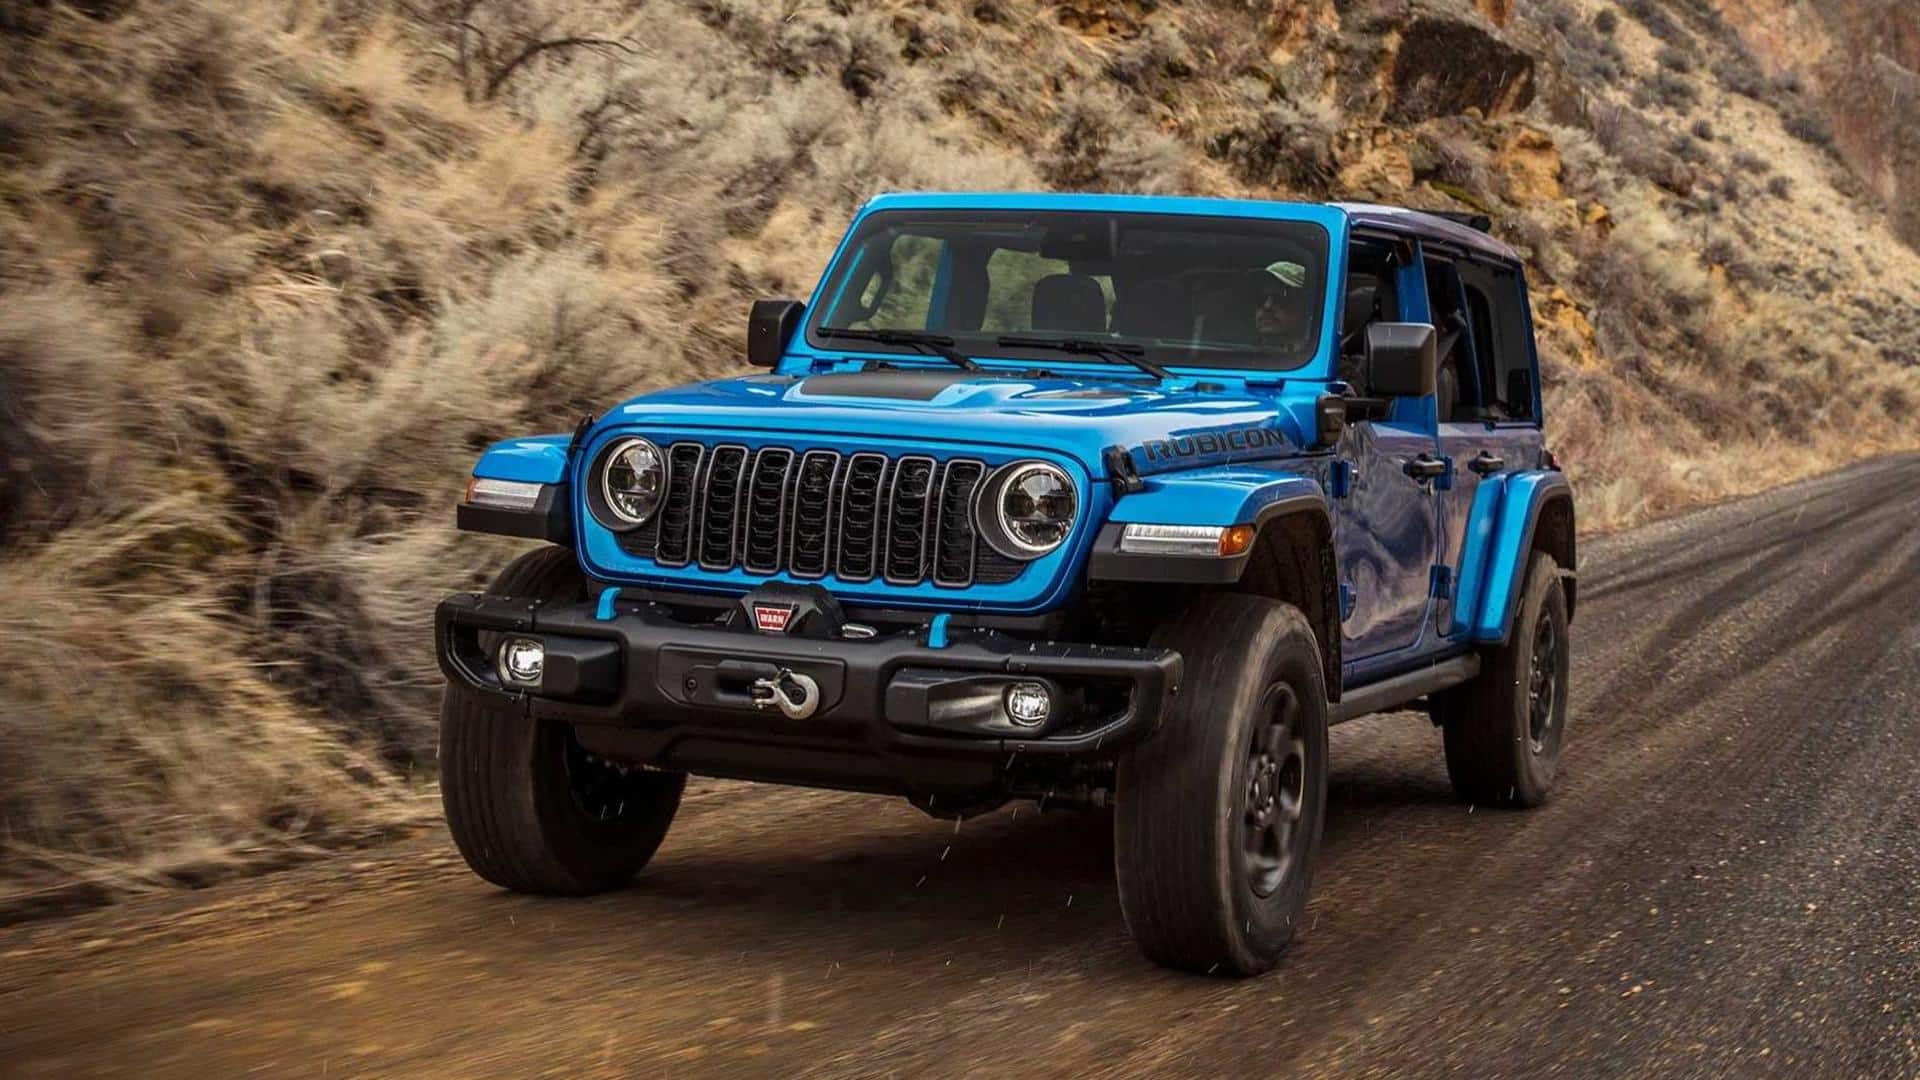 2024 Jeep Wrangler v/s 2023 model: Know the key differences